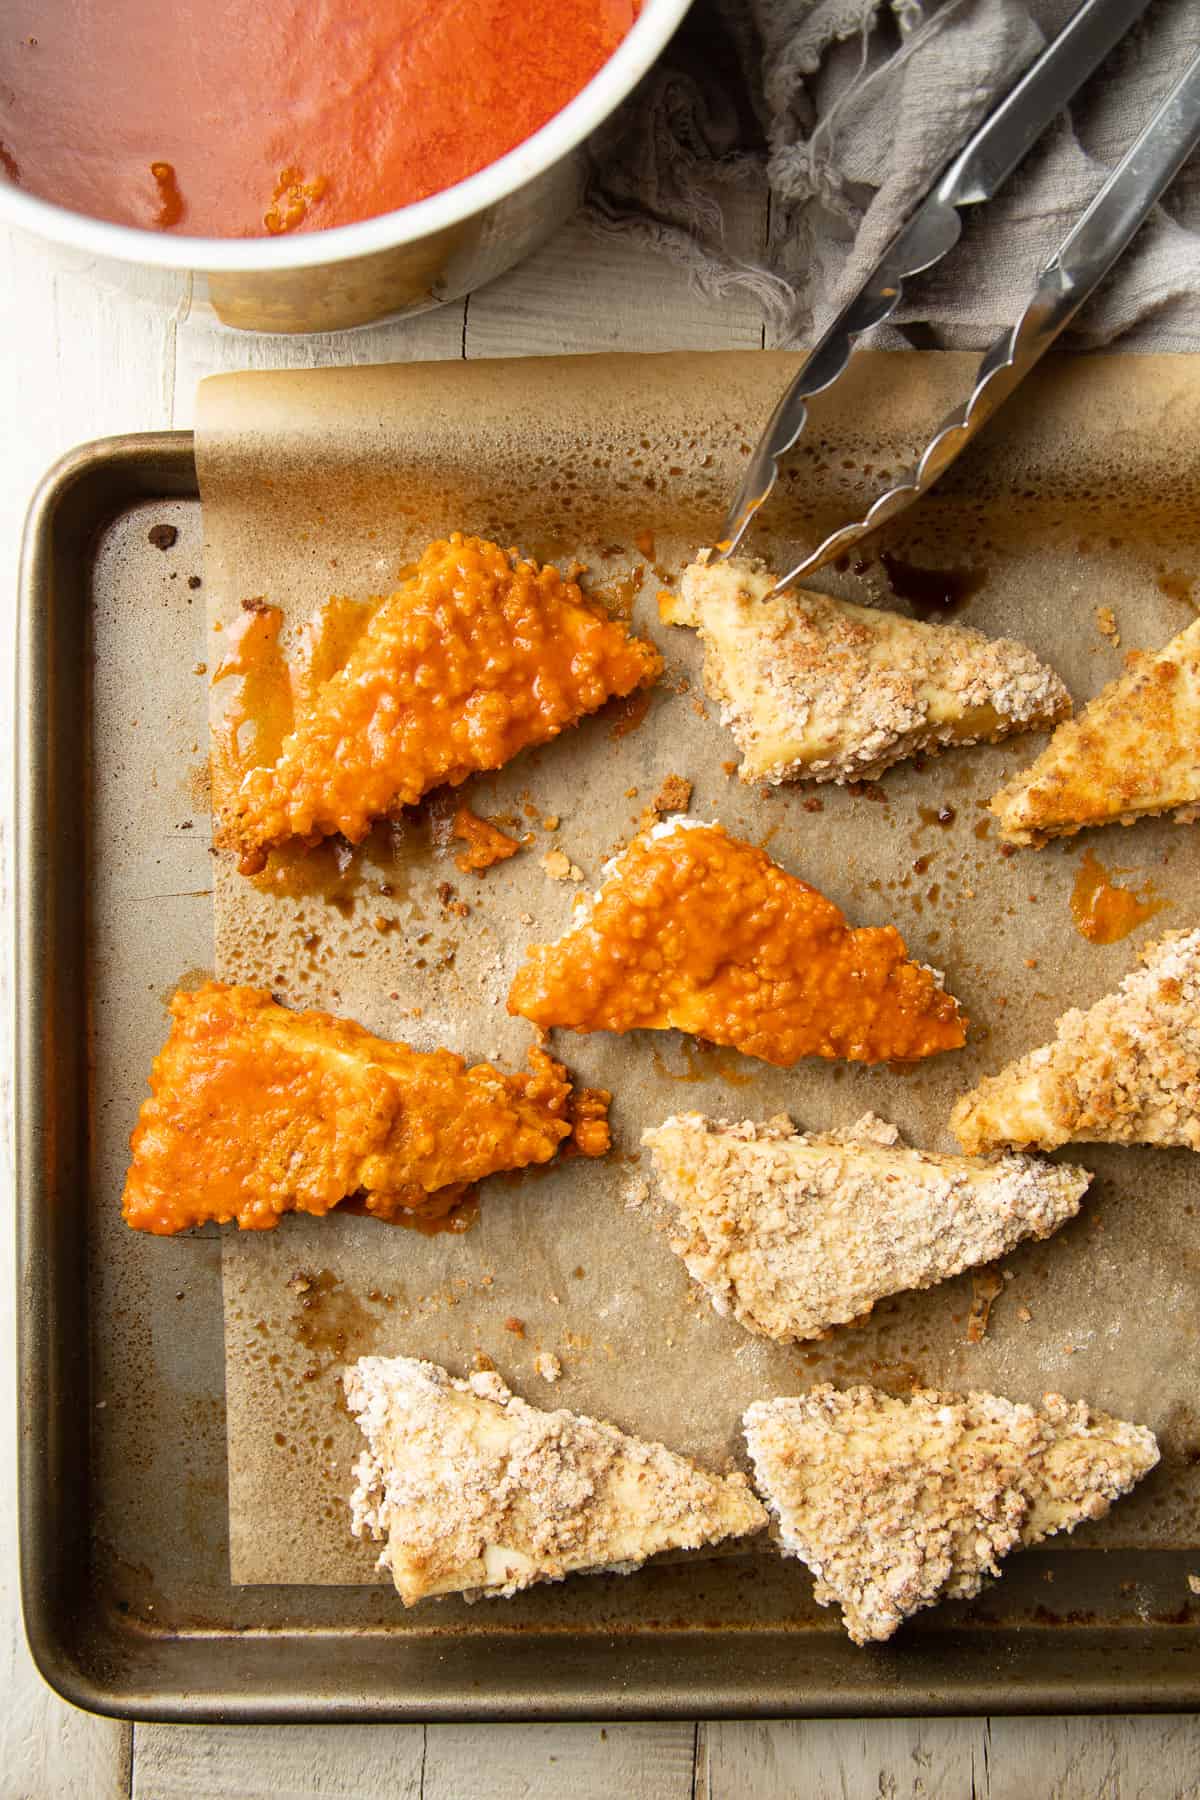 Baked tofu pieces partially dipped in Buffalo sauce and arranged on a baking sheet.